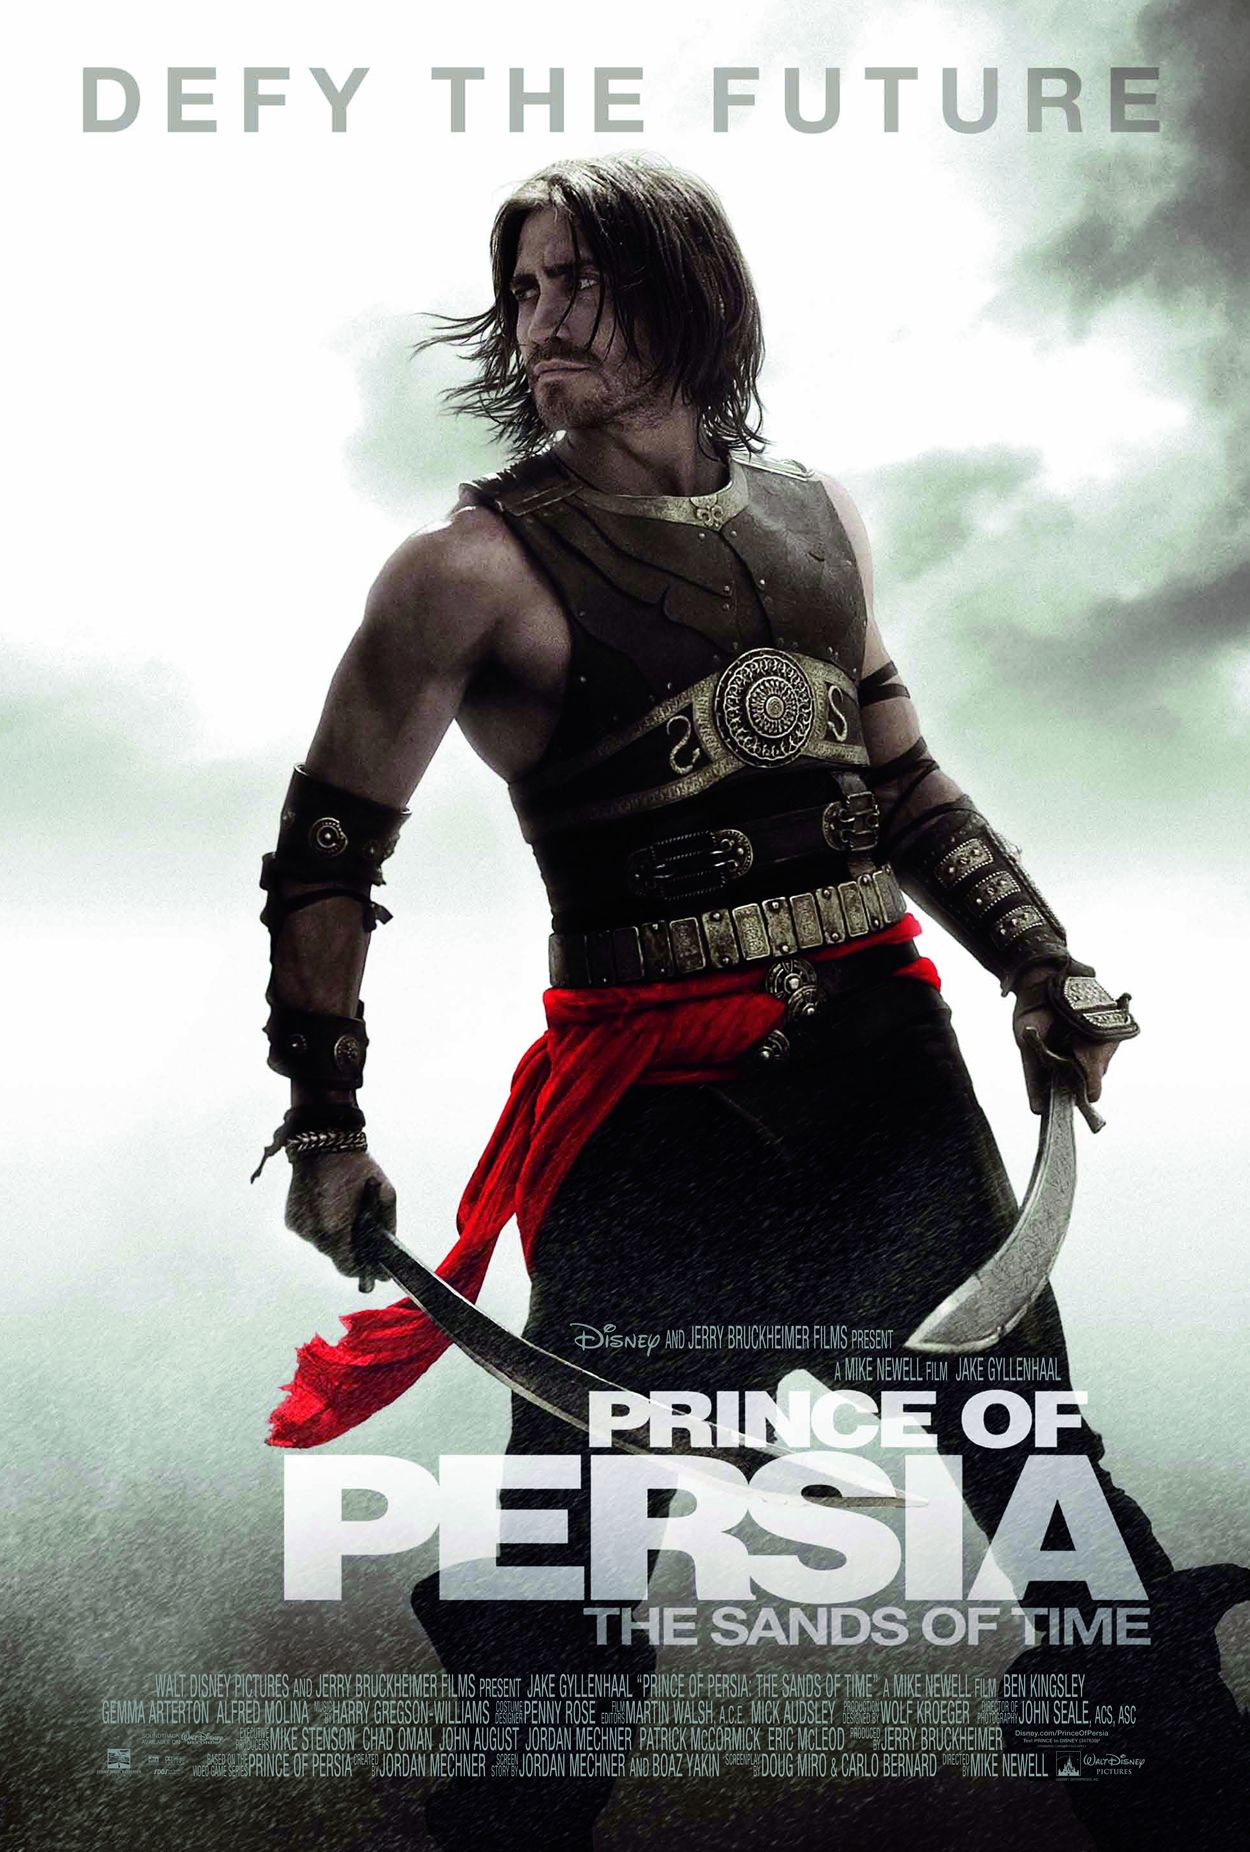 Prince of Persia: The Sands of Time Jake Gyllenhaal Poster